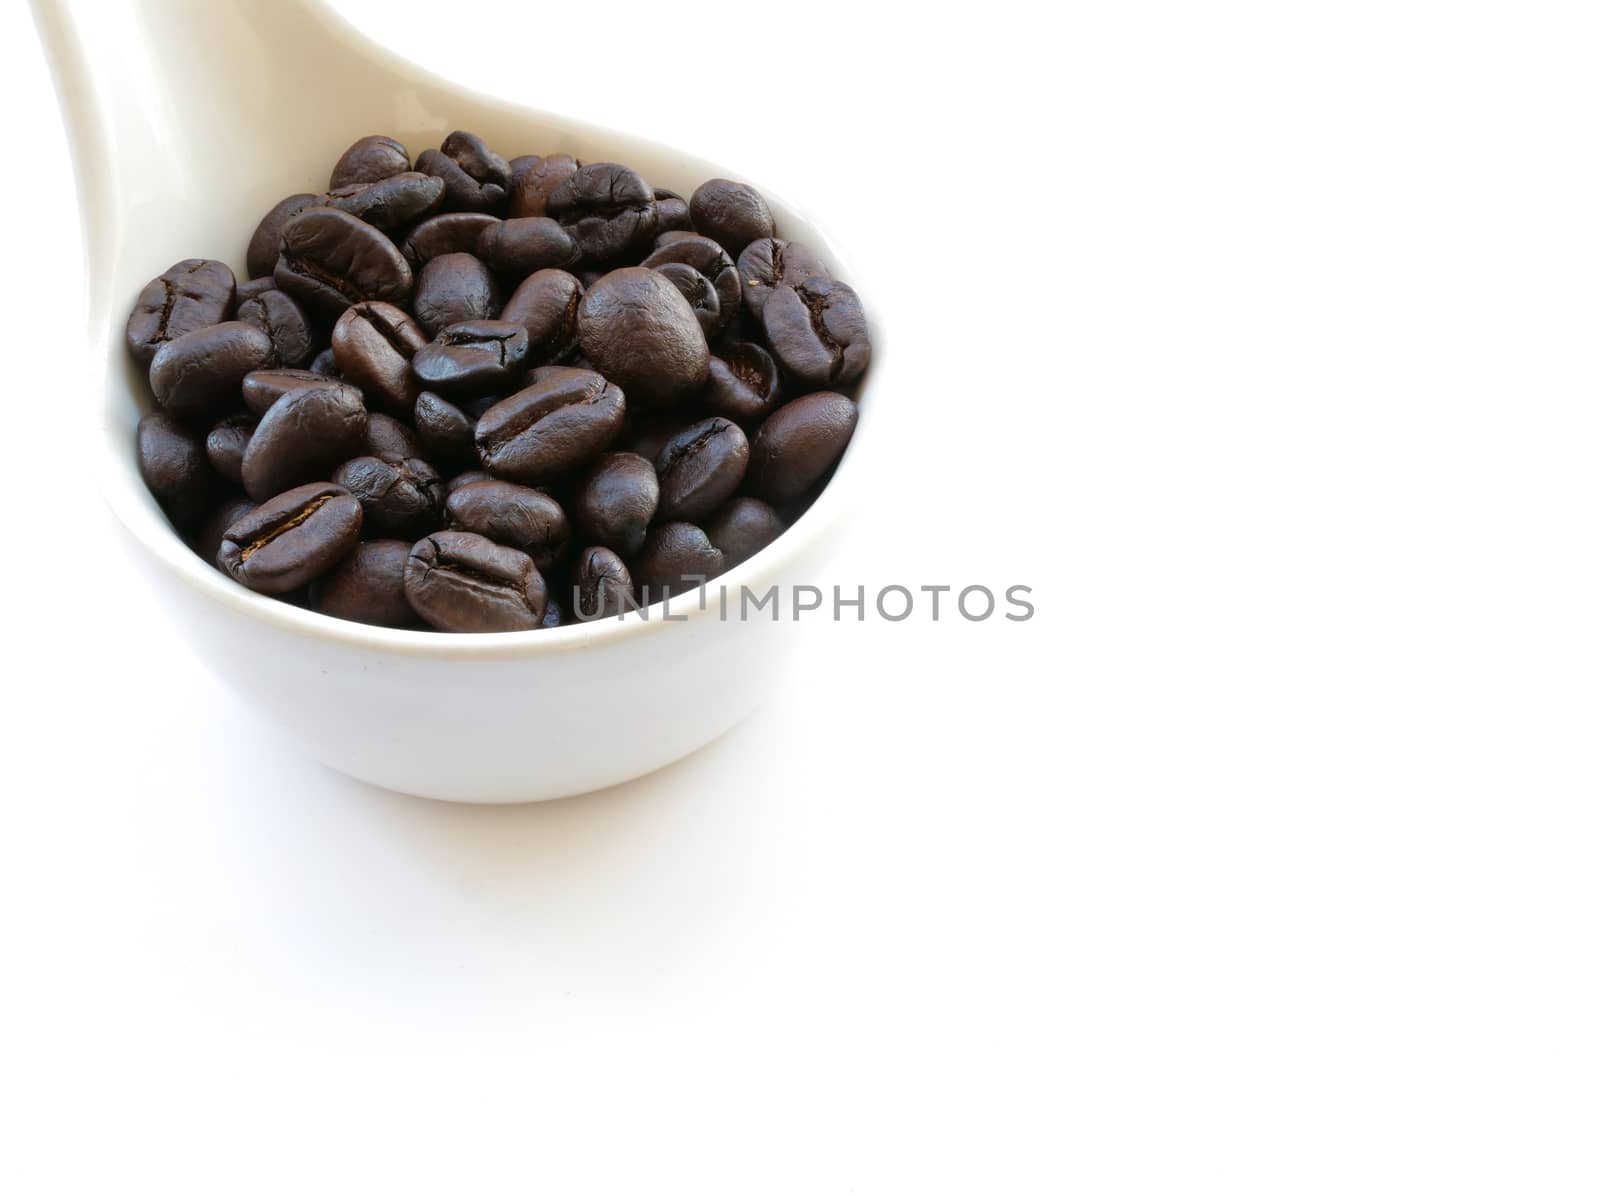 freshly roasted coffee beans in a ceramic spoon, isolated on white background